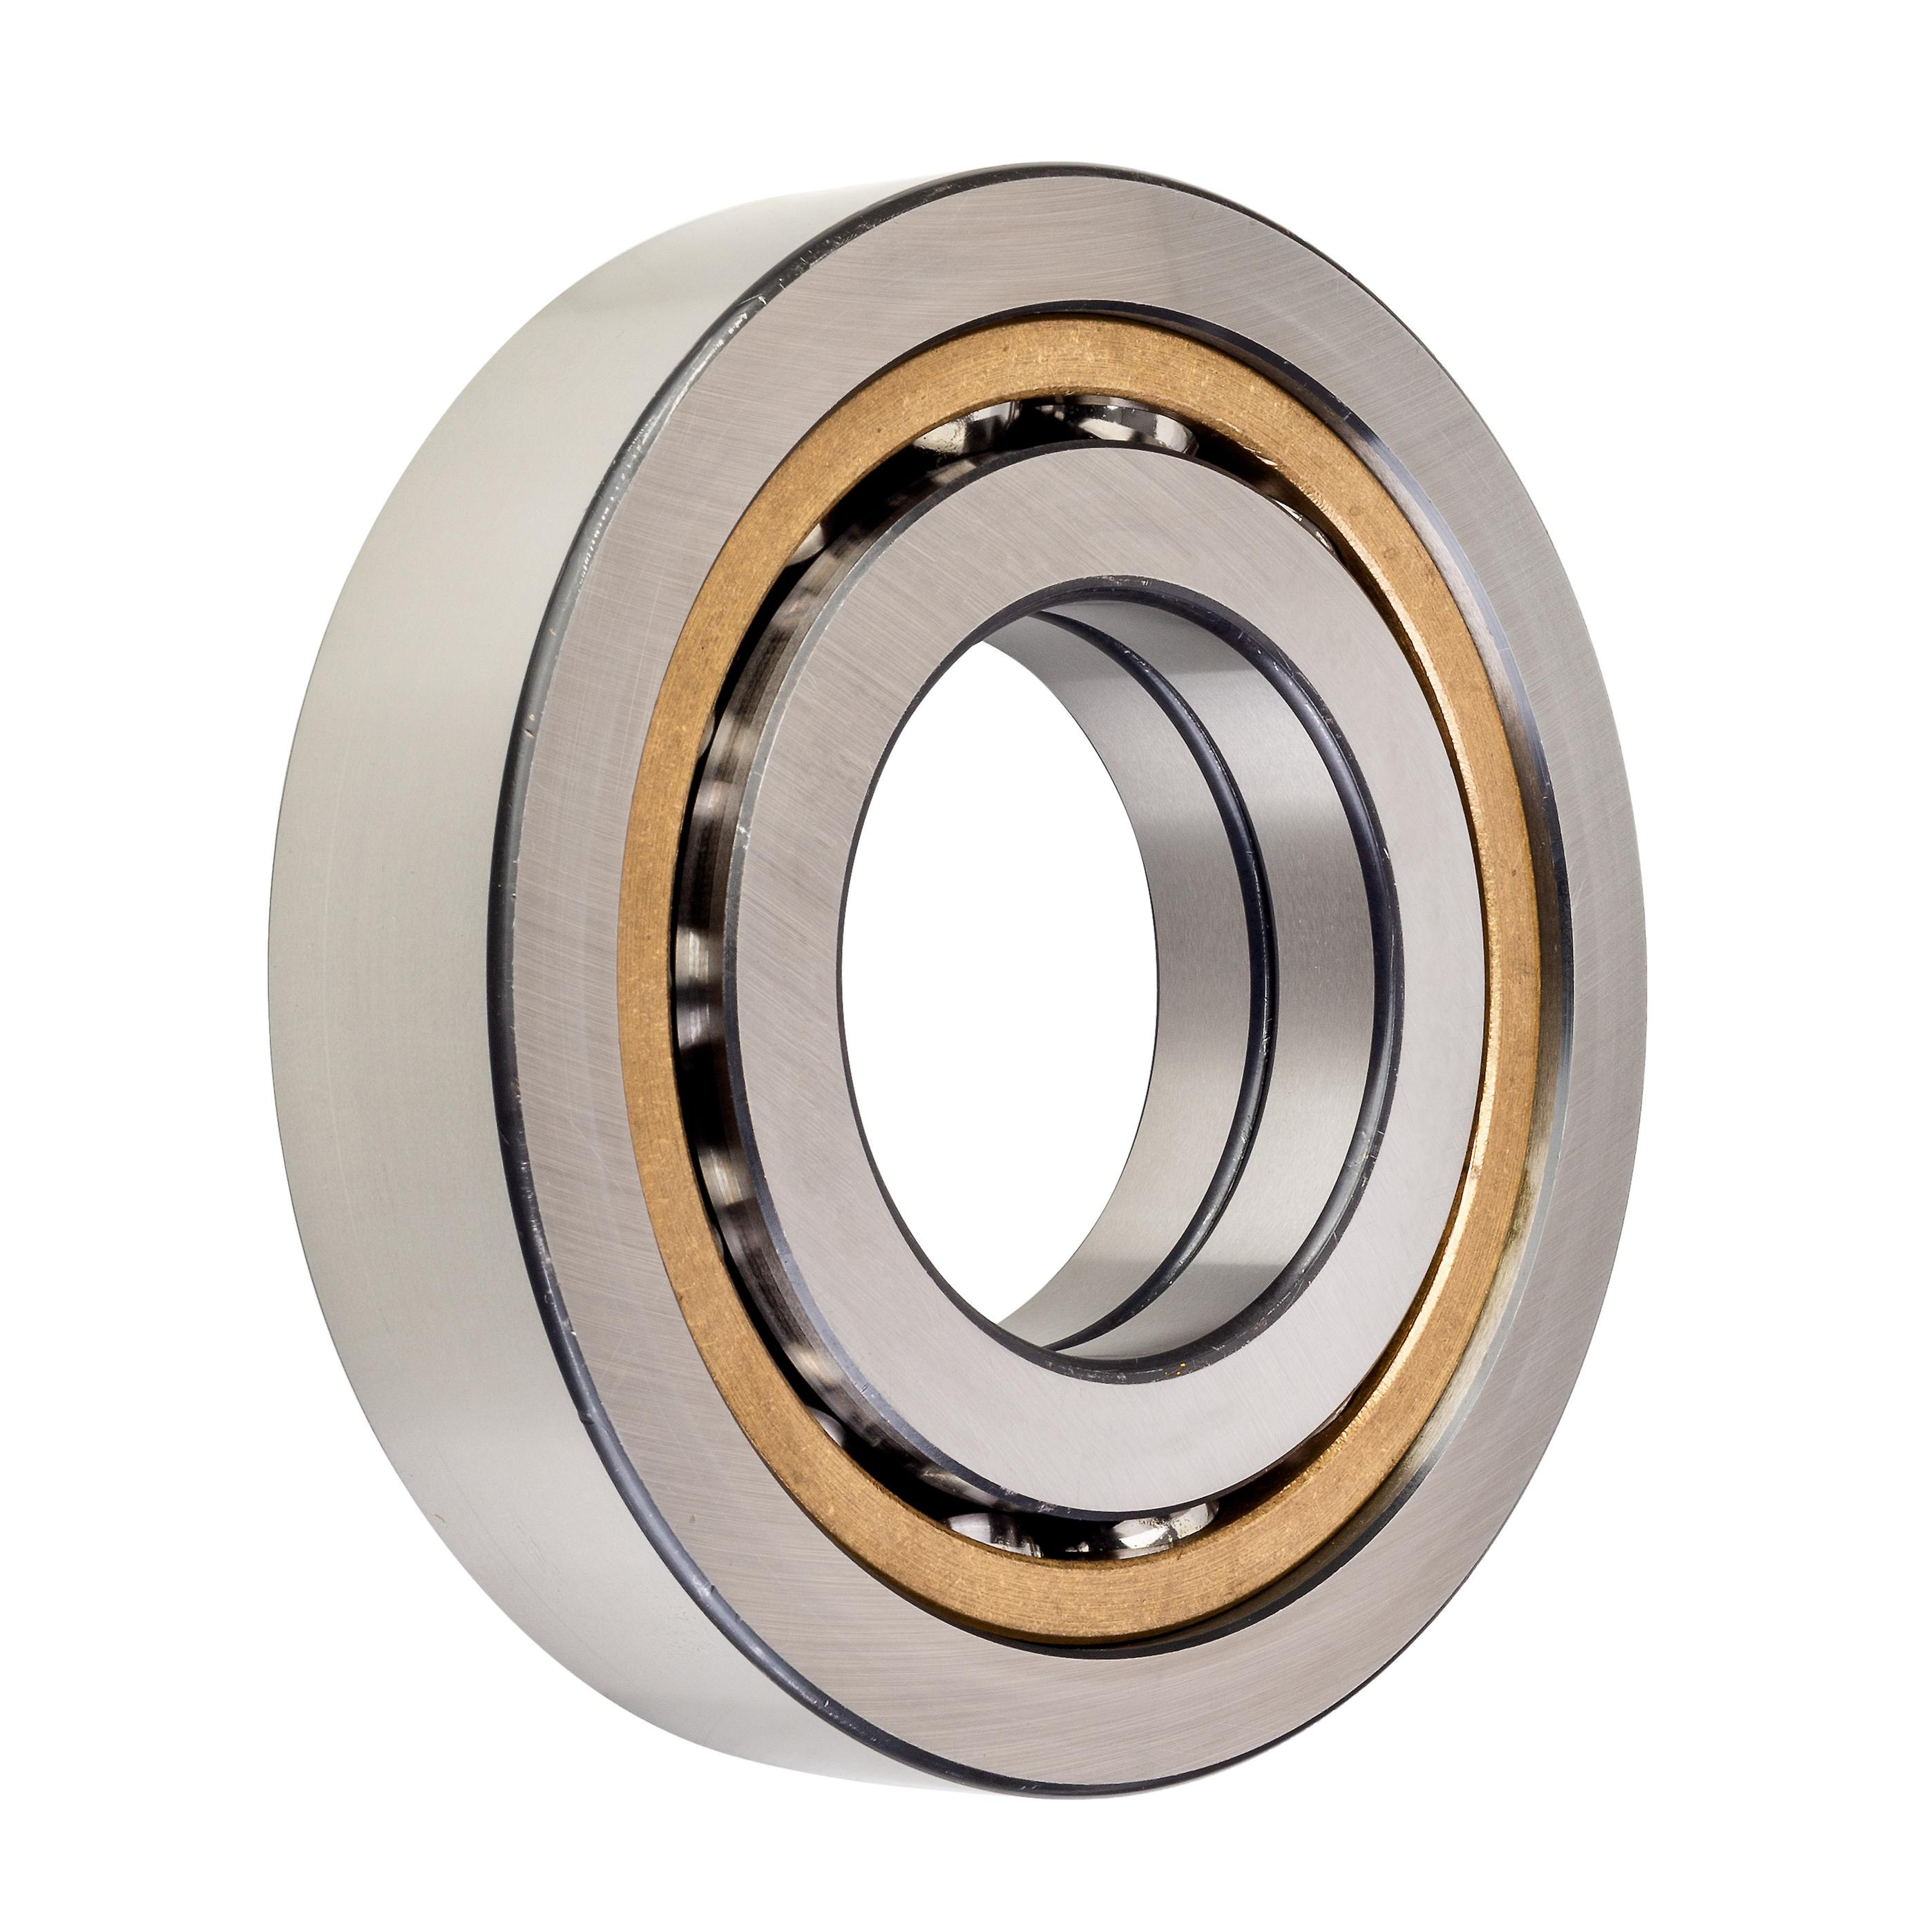 QJ 217 N2MA Four-Point Contact Angular Contact Ball Bearings (General)